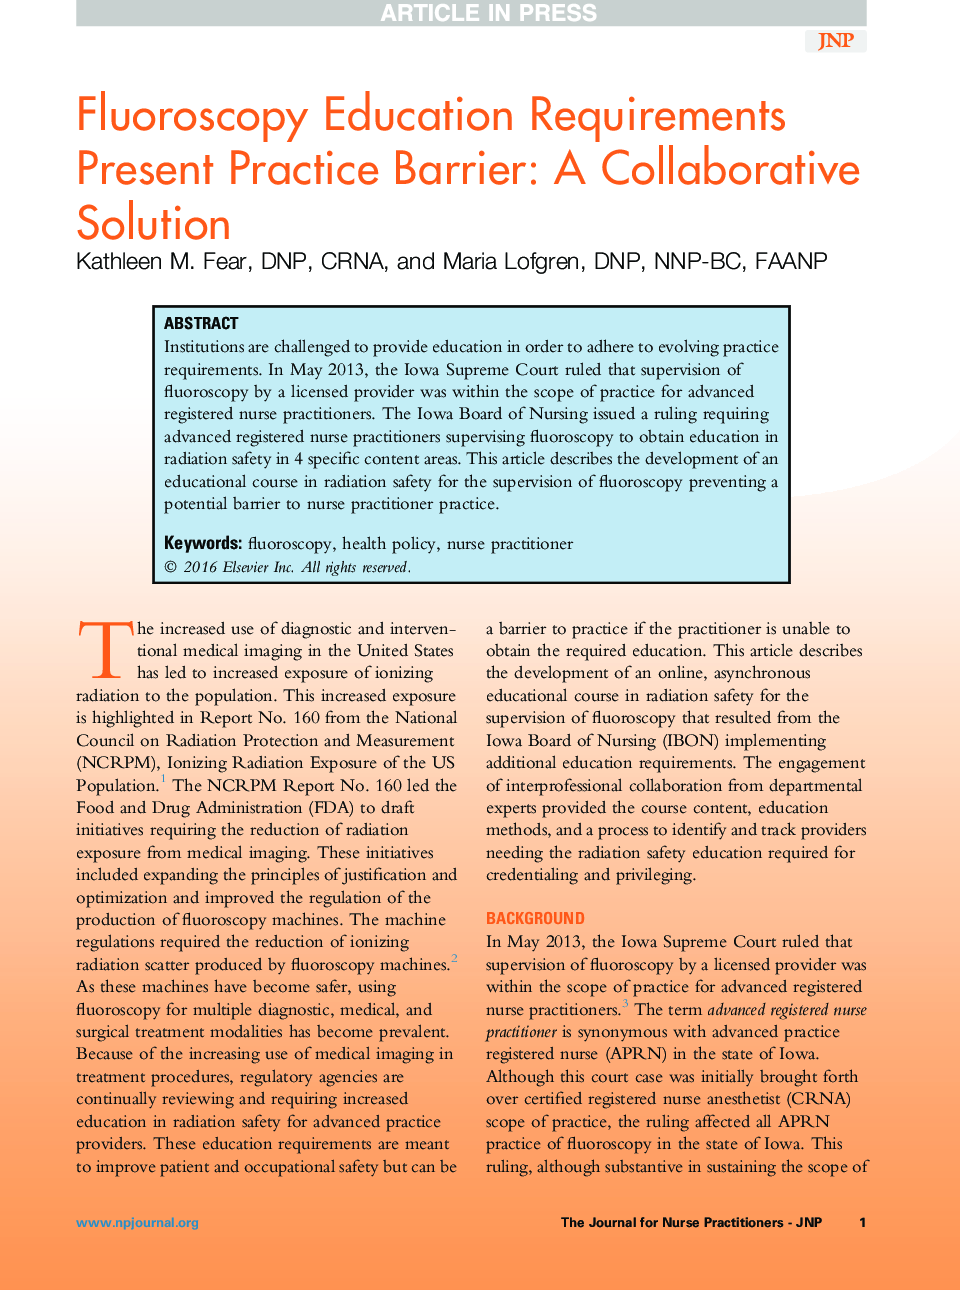 Fluoroscopy Education Requirements Present Practice Barrier: A Collaborative Solution